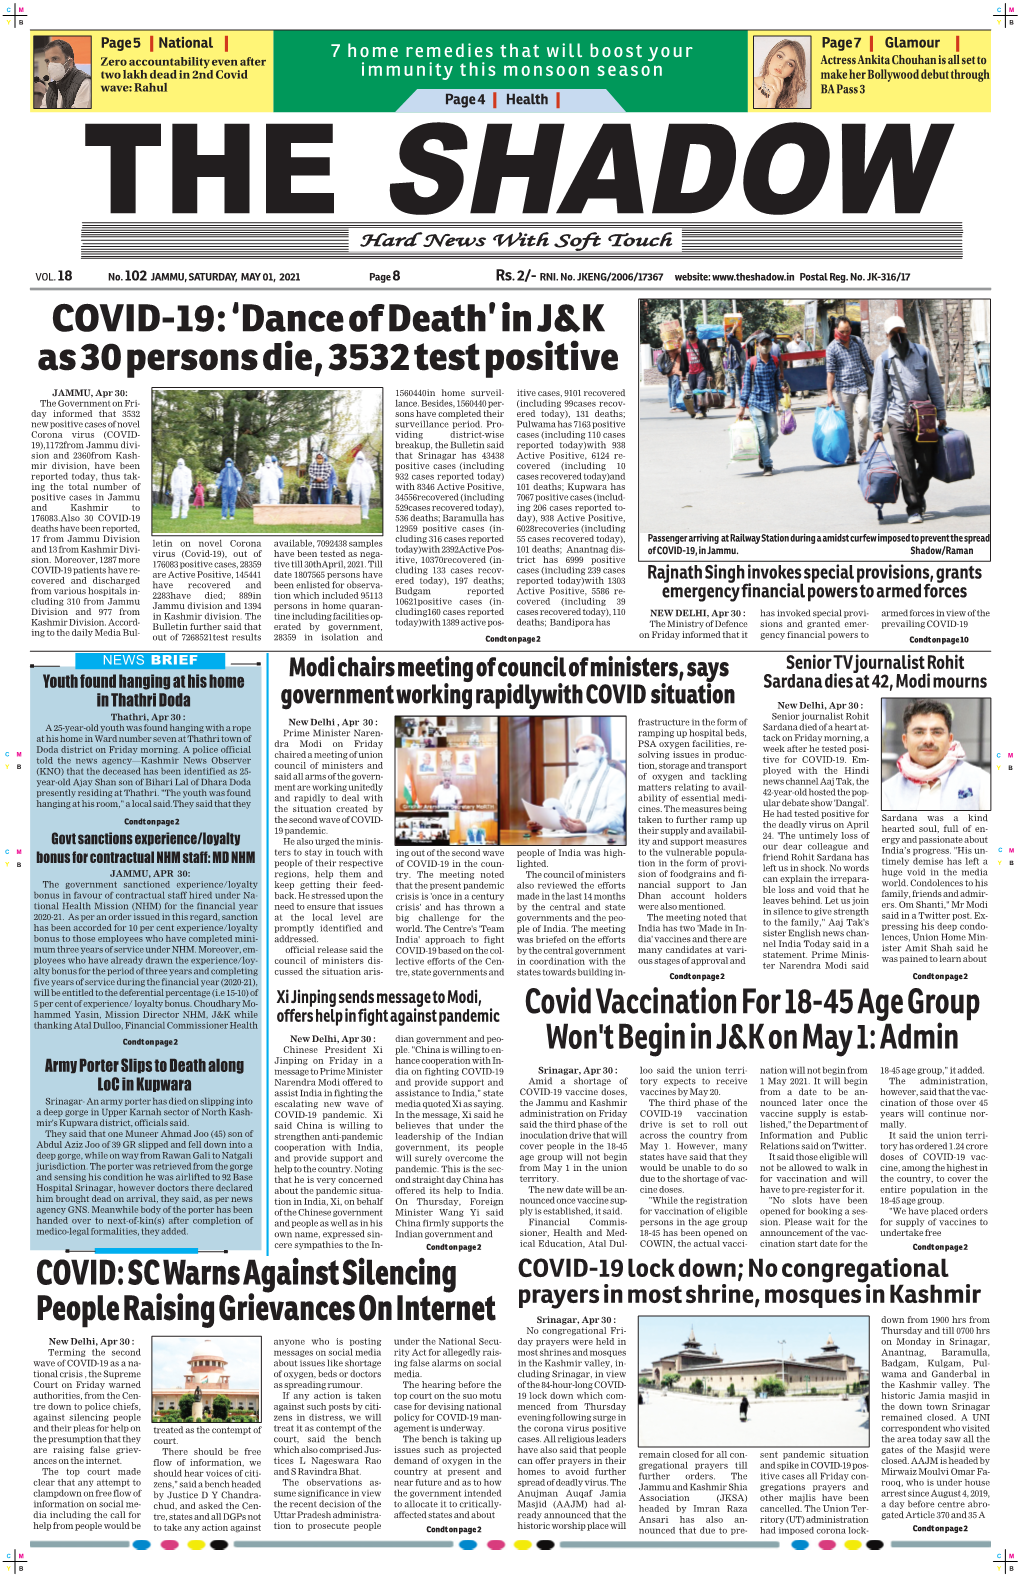 COVID-19: ‘Dance of Death’ in J&K As 30 Persons Die, 3532 Test Positive